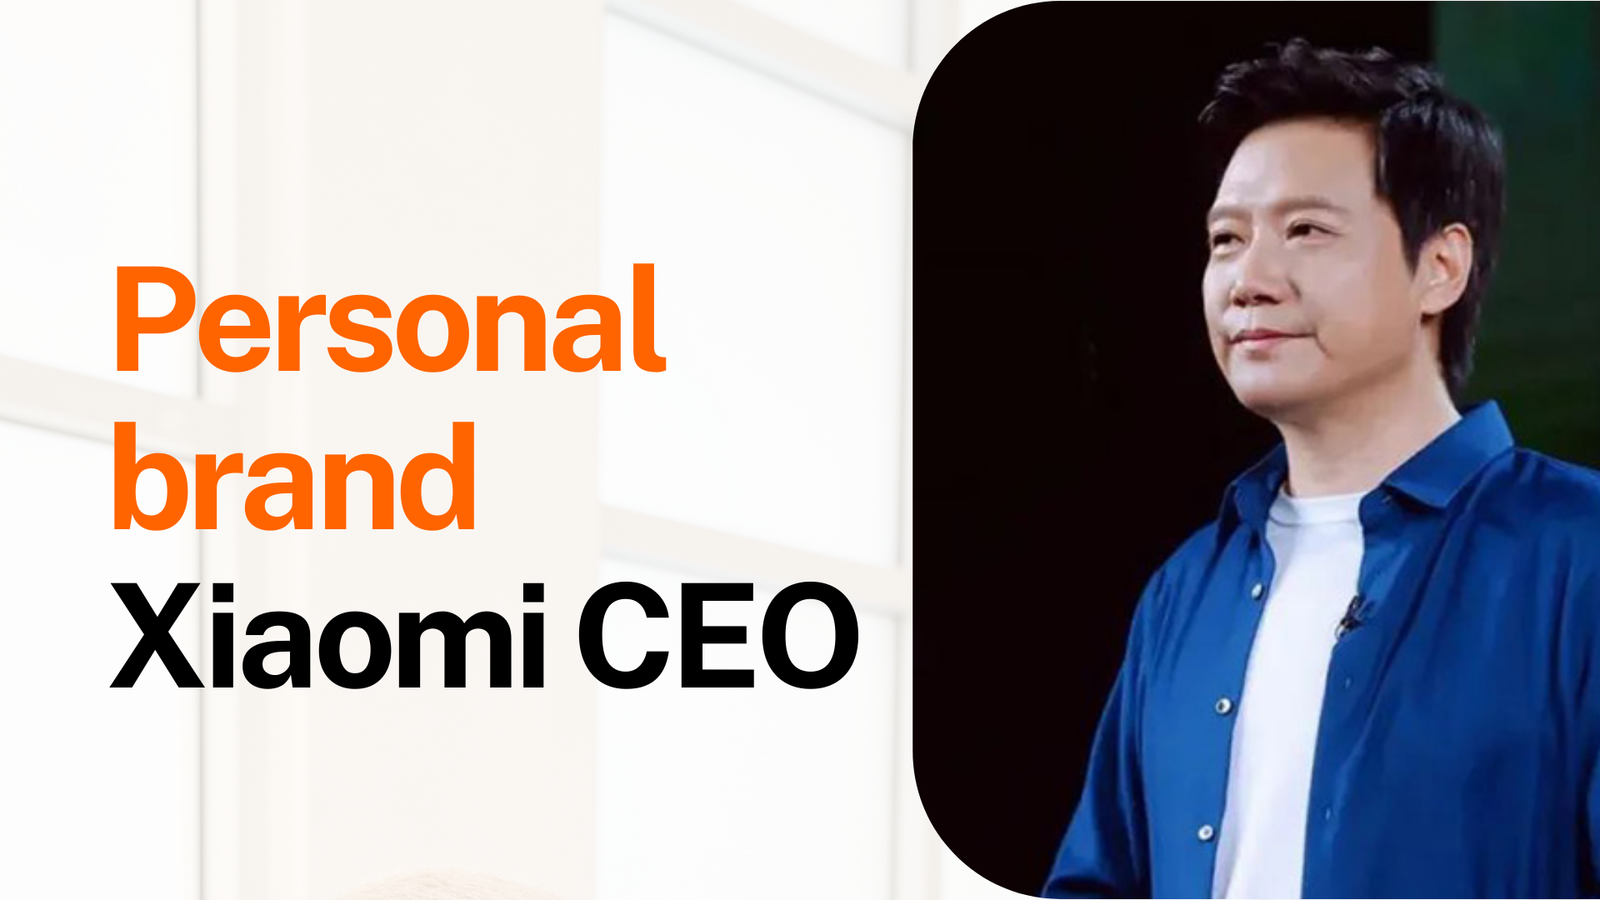 Personal brand Xiaomi CEO-3 Key Elements of the Personal Brand of Xiaomi's CEO